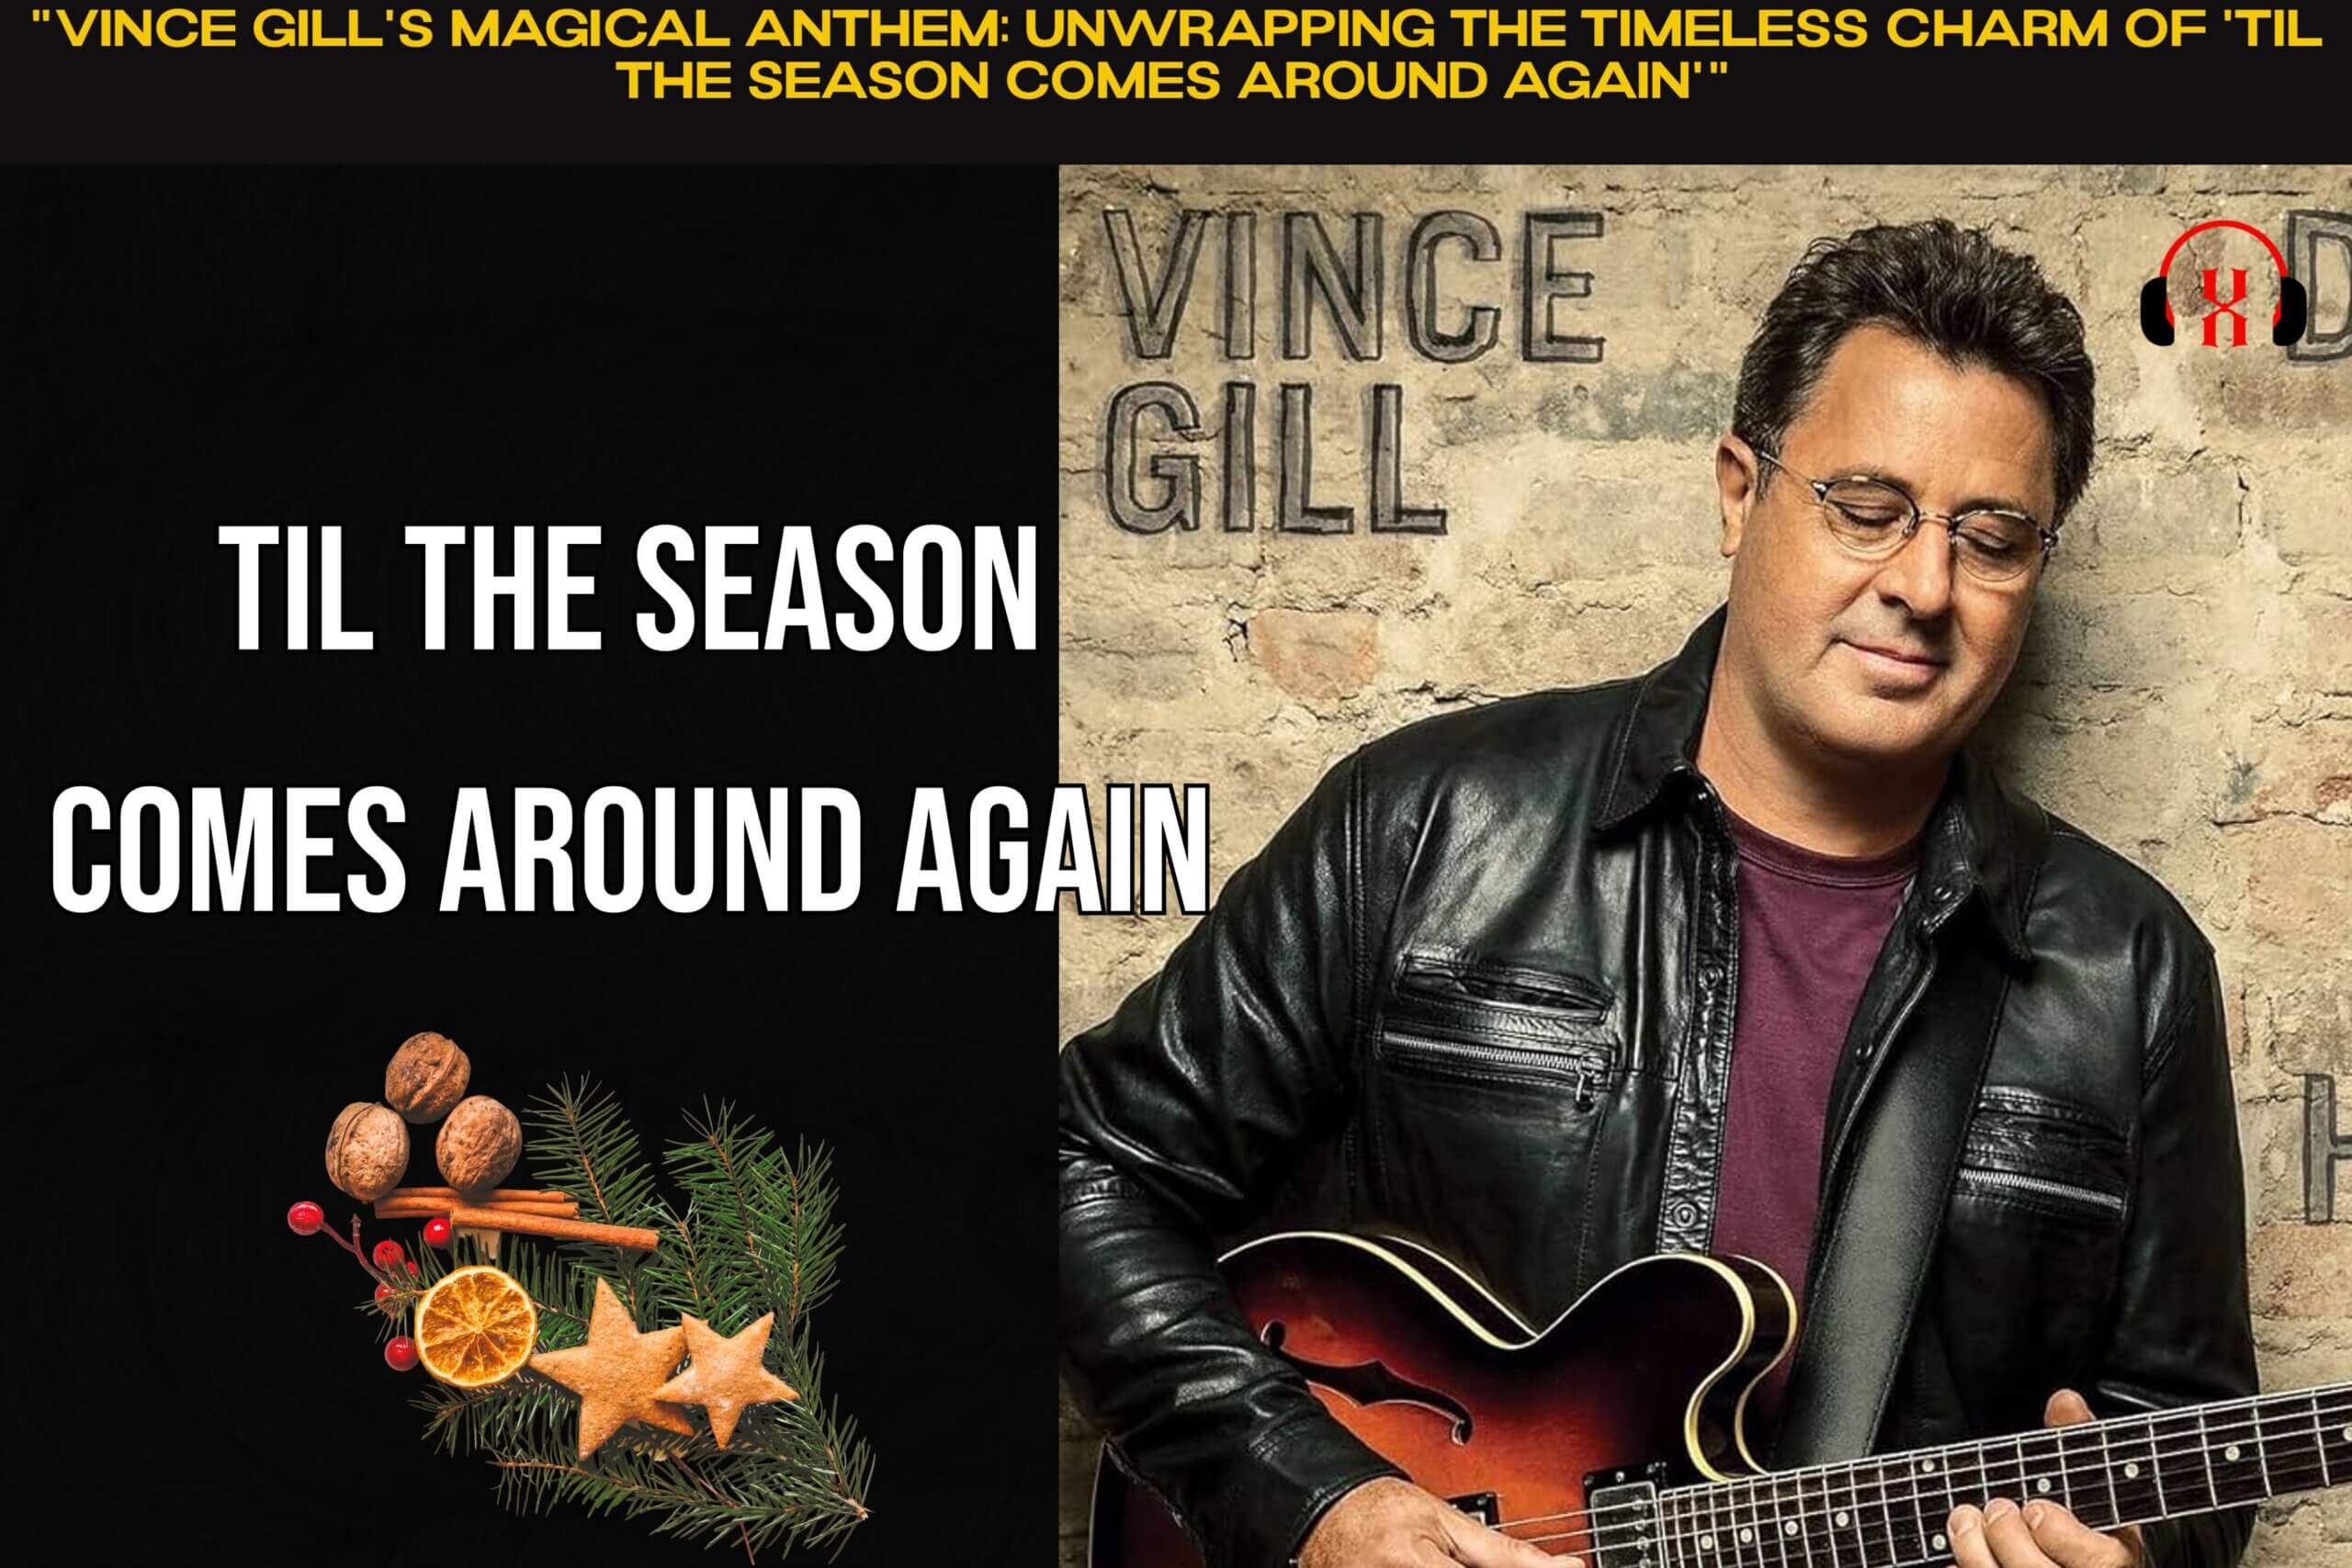 "Vince Gill's Magical Anthem: Unwrapping the Timeless Charm of 'Til the Season Comes Around Again'"